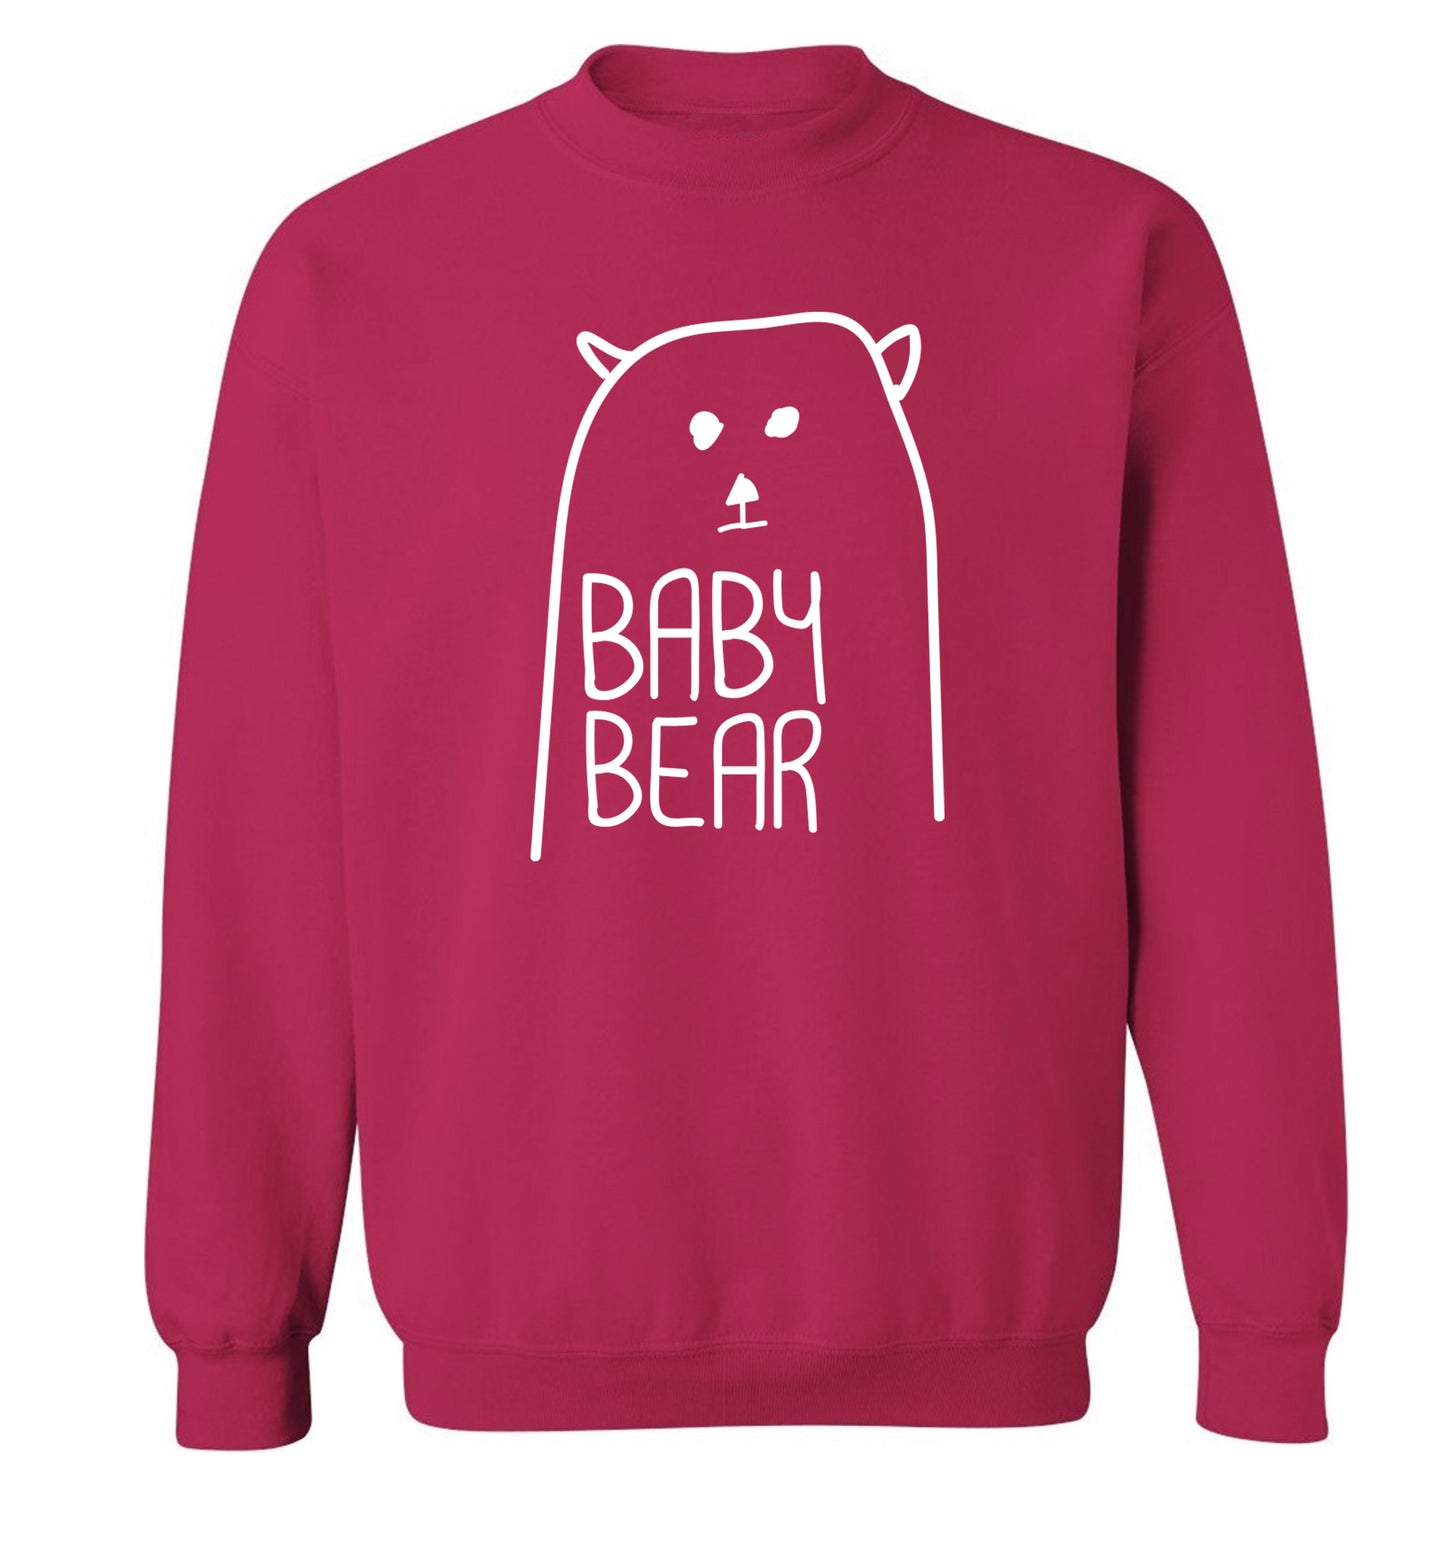 Baby bear Adult's unisex pink Sweater 2XL